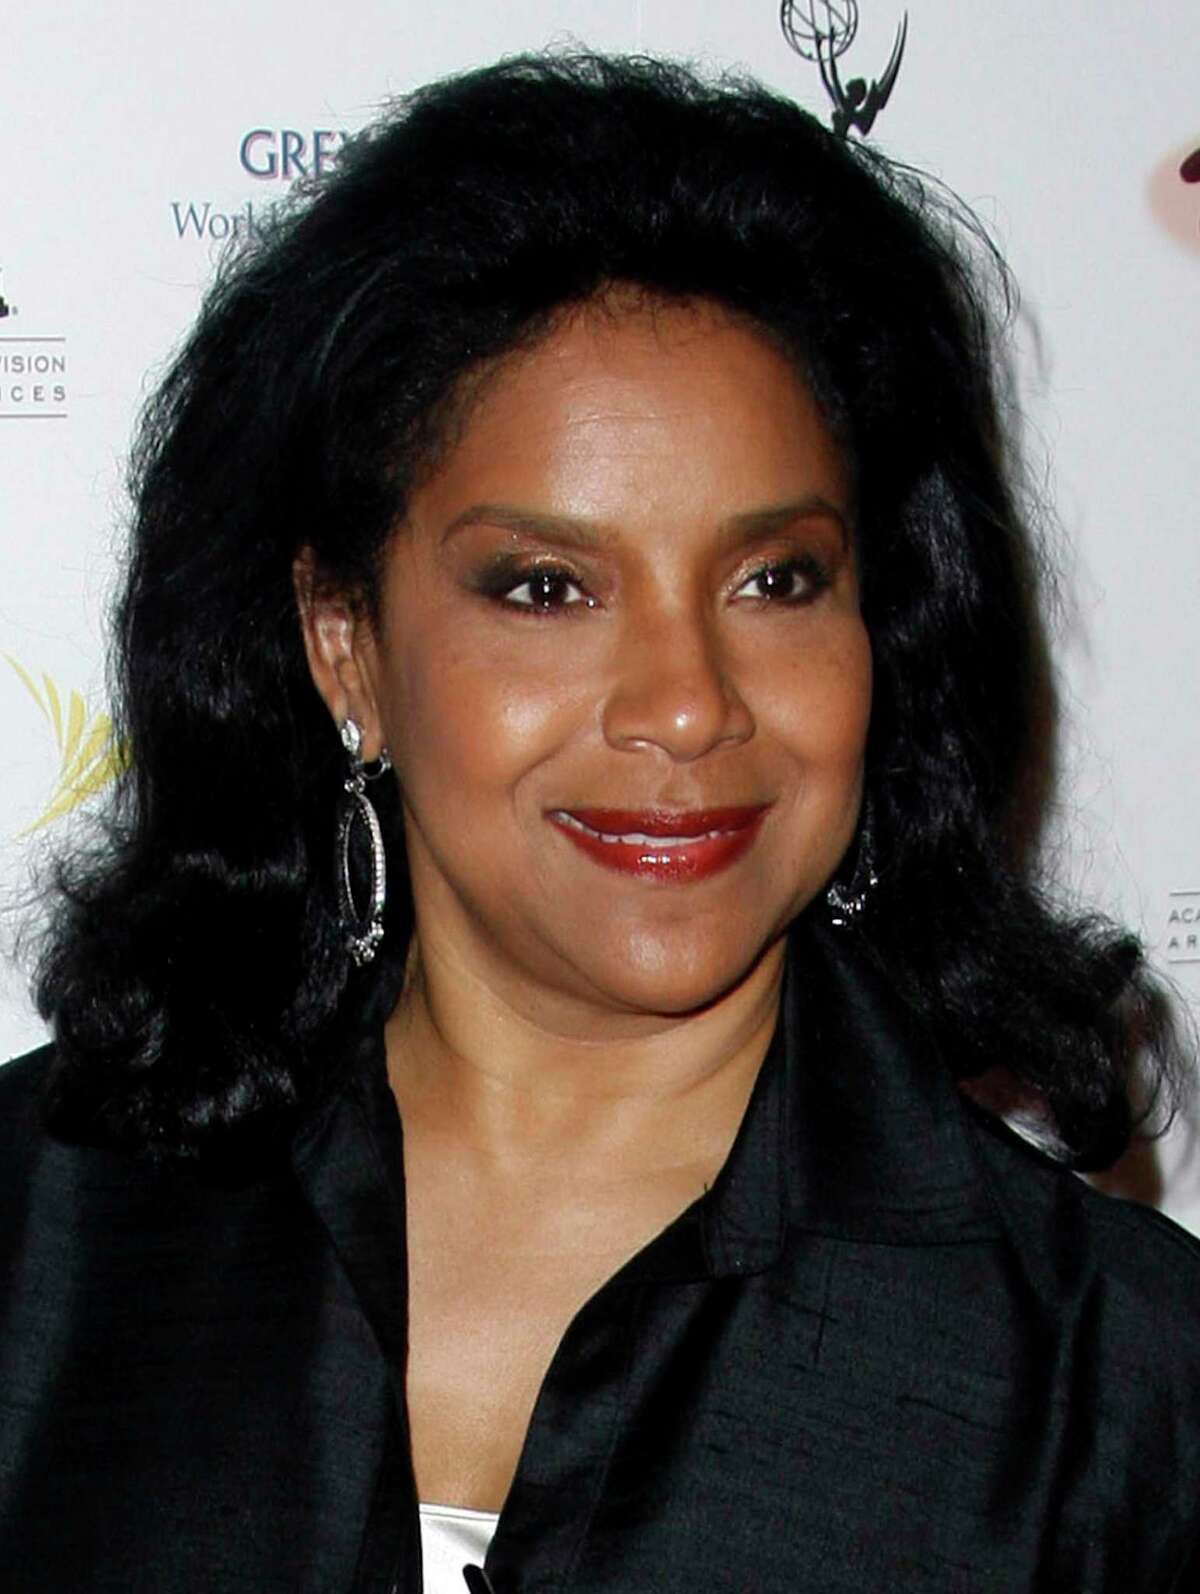 ** FILE ** In this Sept. 19, 2008 file photo, Phylicia Rashad arrives at the 2008 Primetime Emmy Awards Nominees for Outstanding Performance reception in Los Angeles. (AP Photo/Matt Sayles, file)